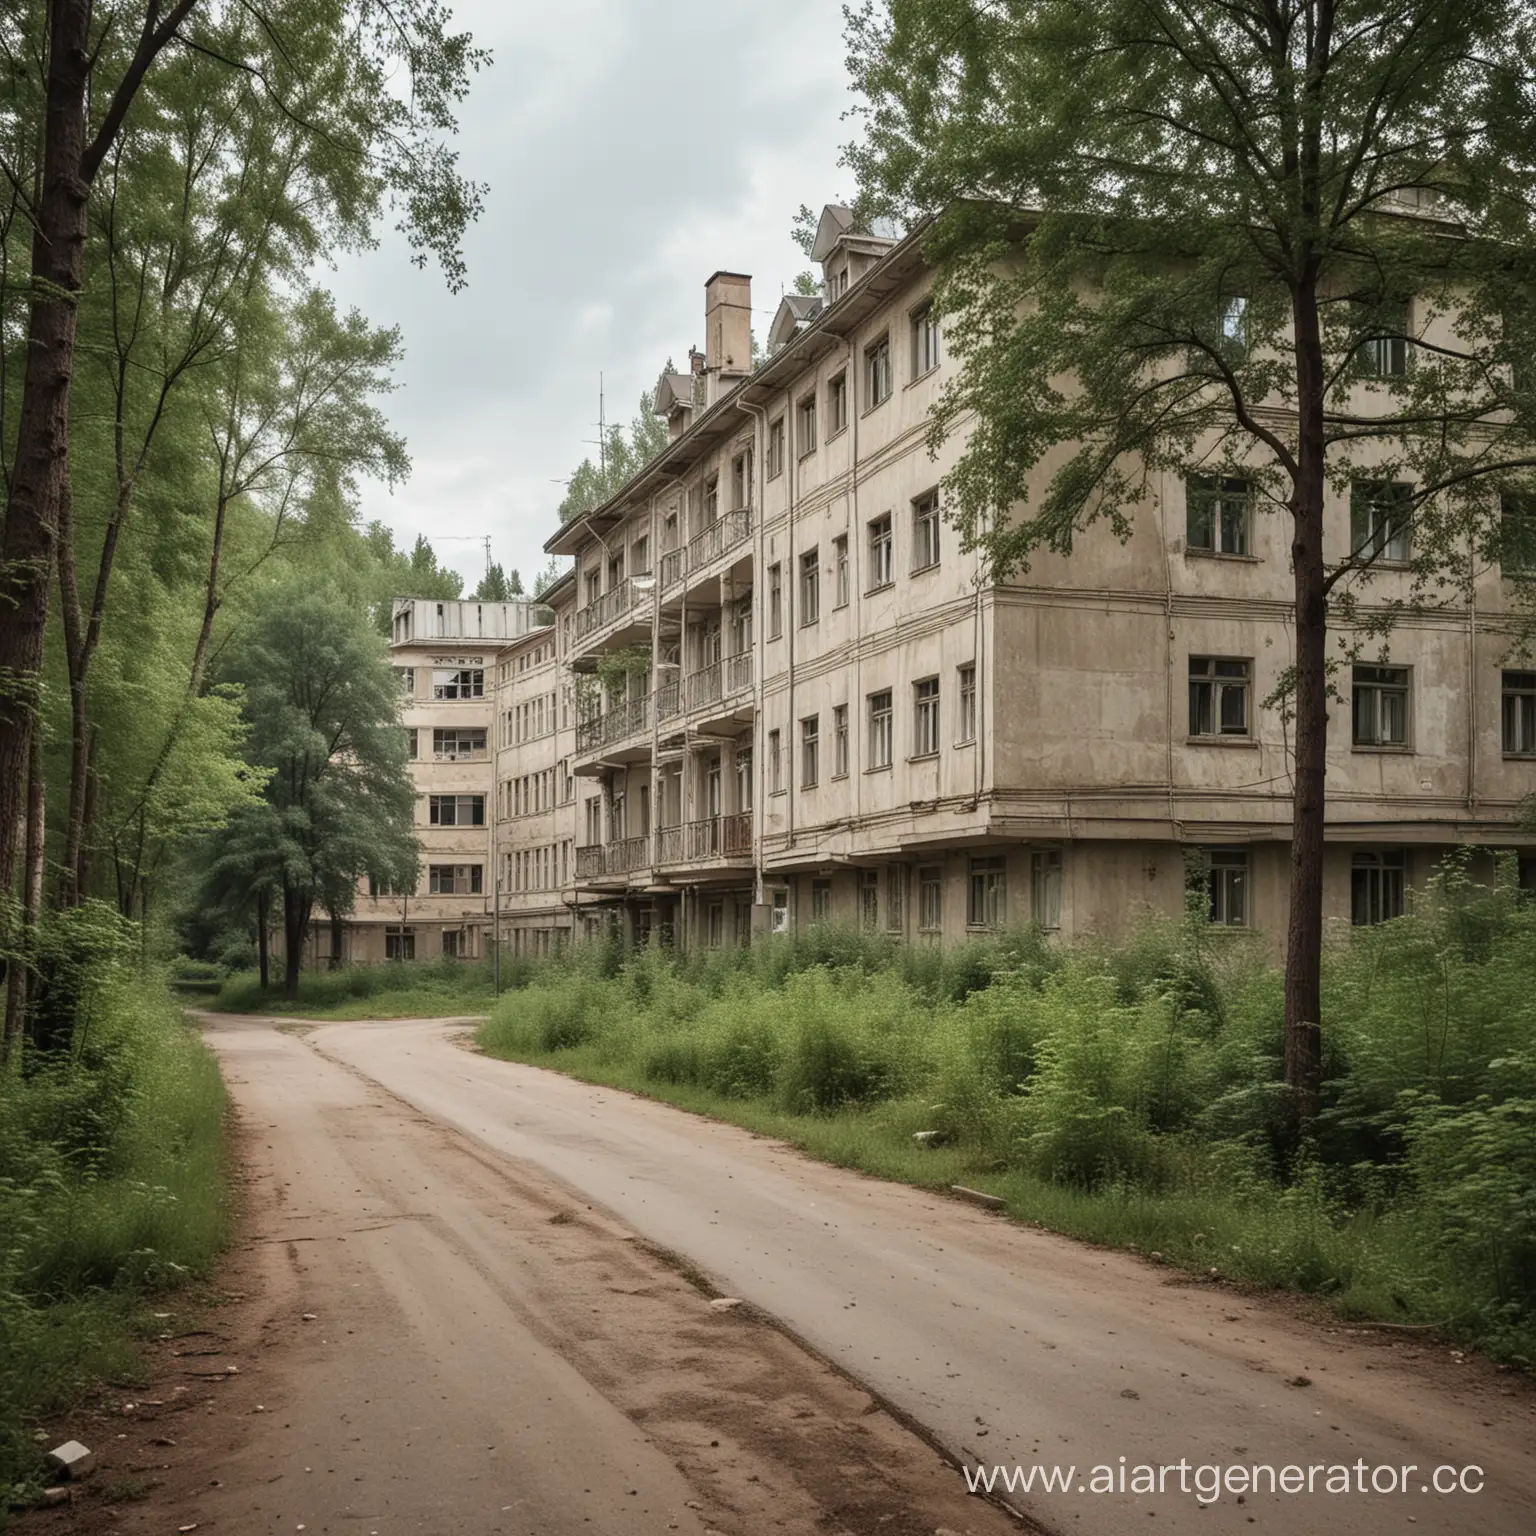 An ancient sanatorium of Soviet times with a pleasant atmosphere.The photo was taken from the side of the street, small trees are visible there and that the sanatorium is a little bit overgrown